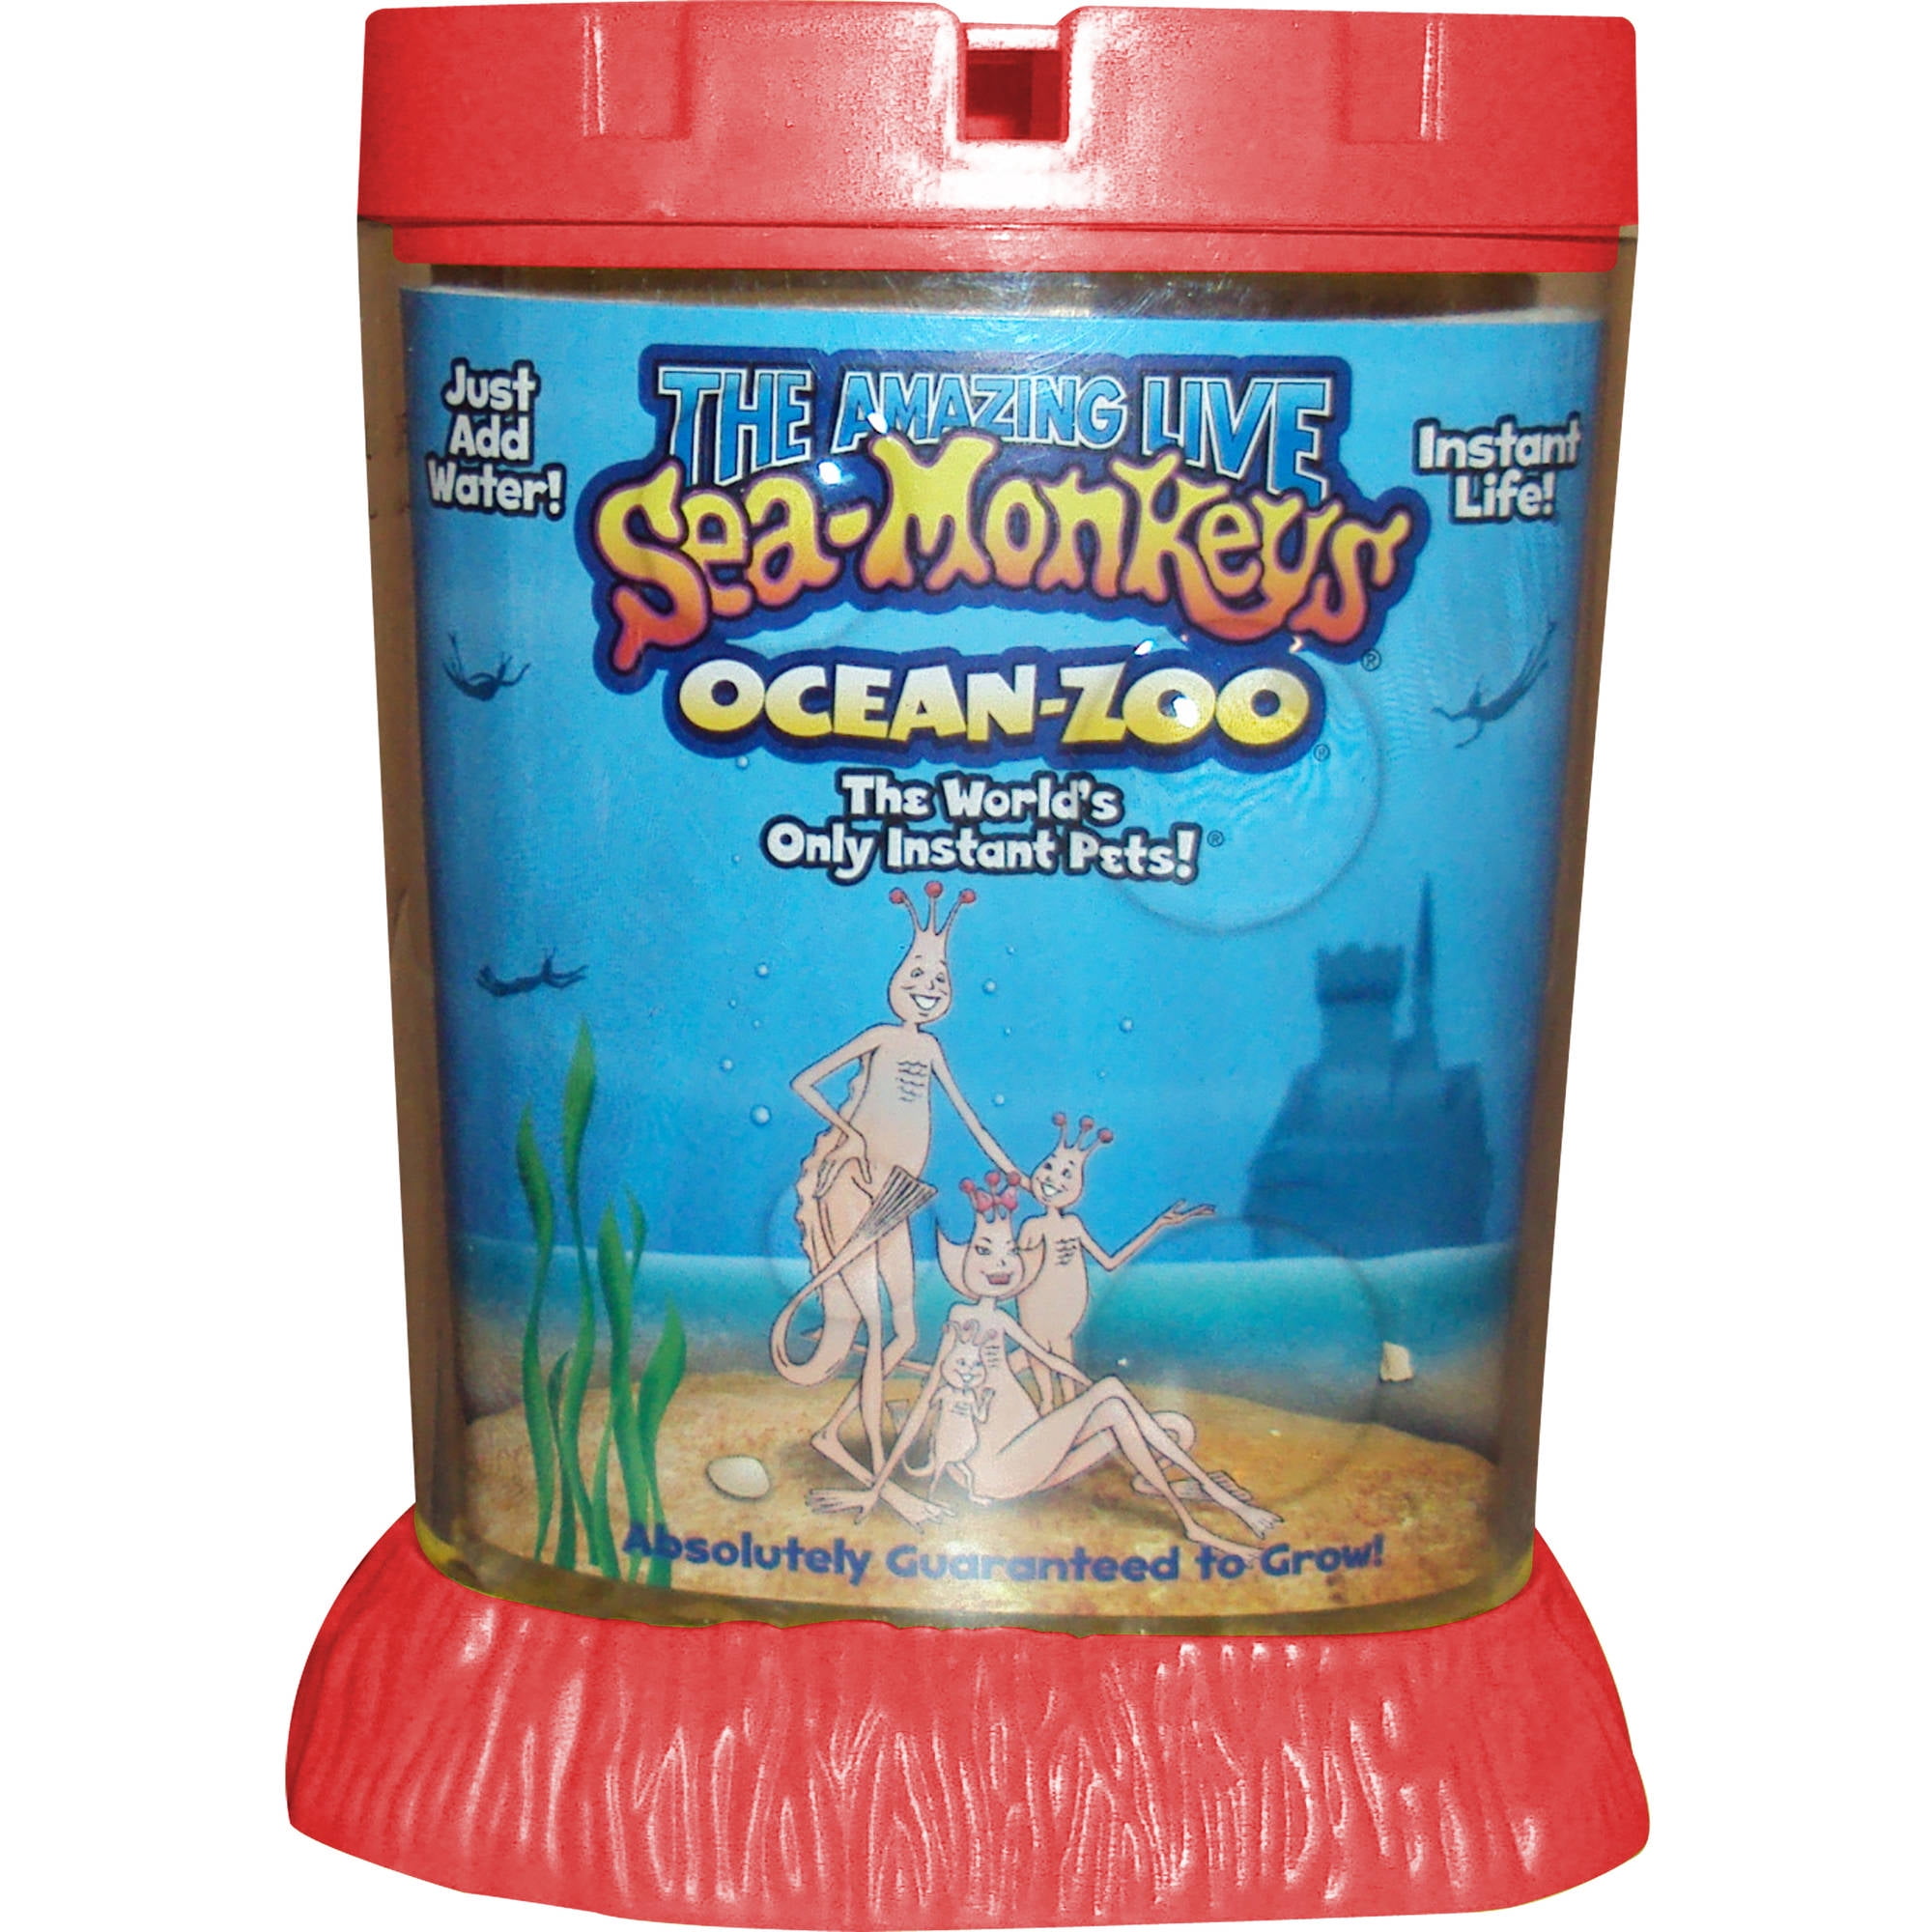 OCEAN ZOO Excellent Quality Classic Fun-filled NEW Amazing Live Sea-Monkeys 